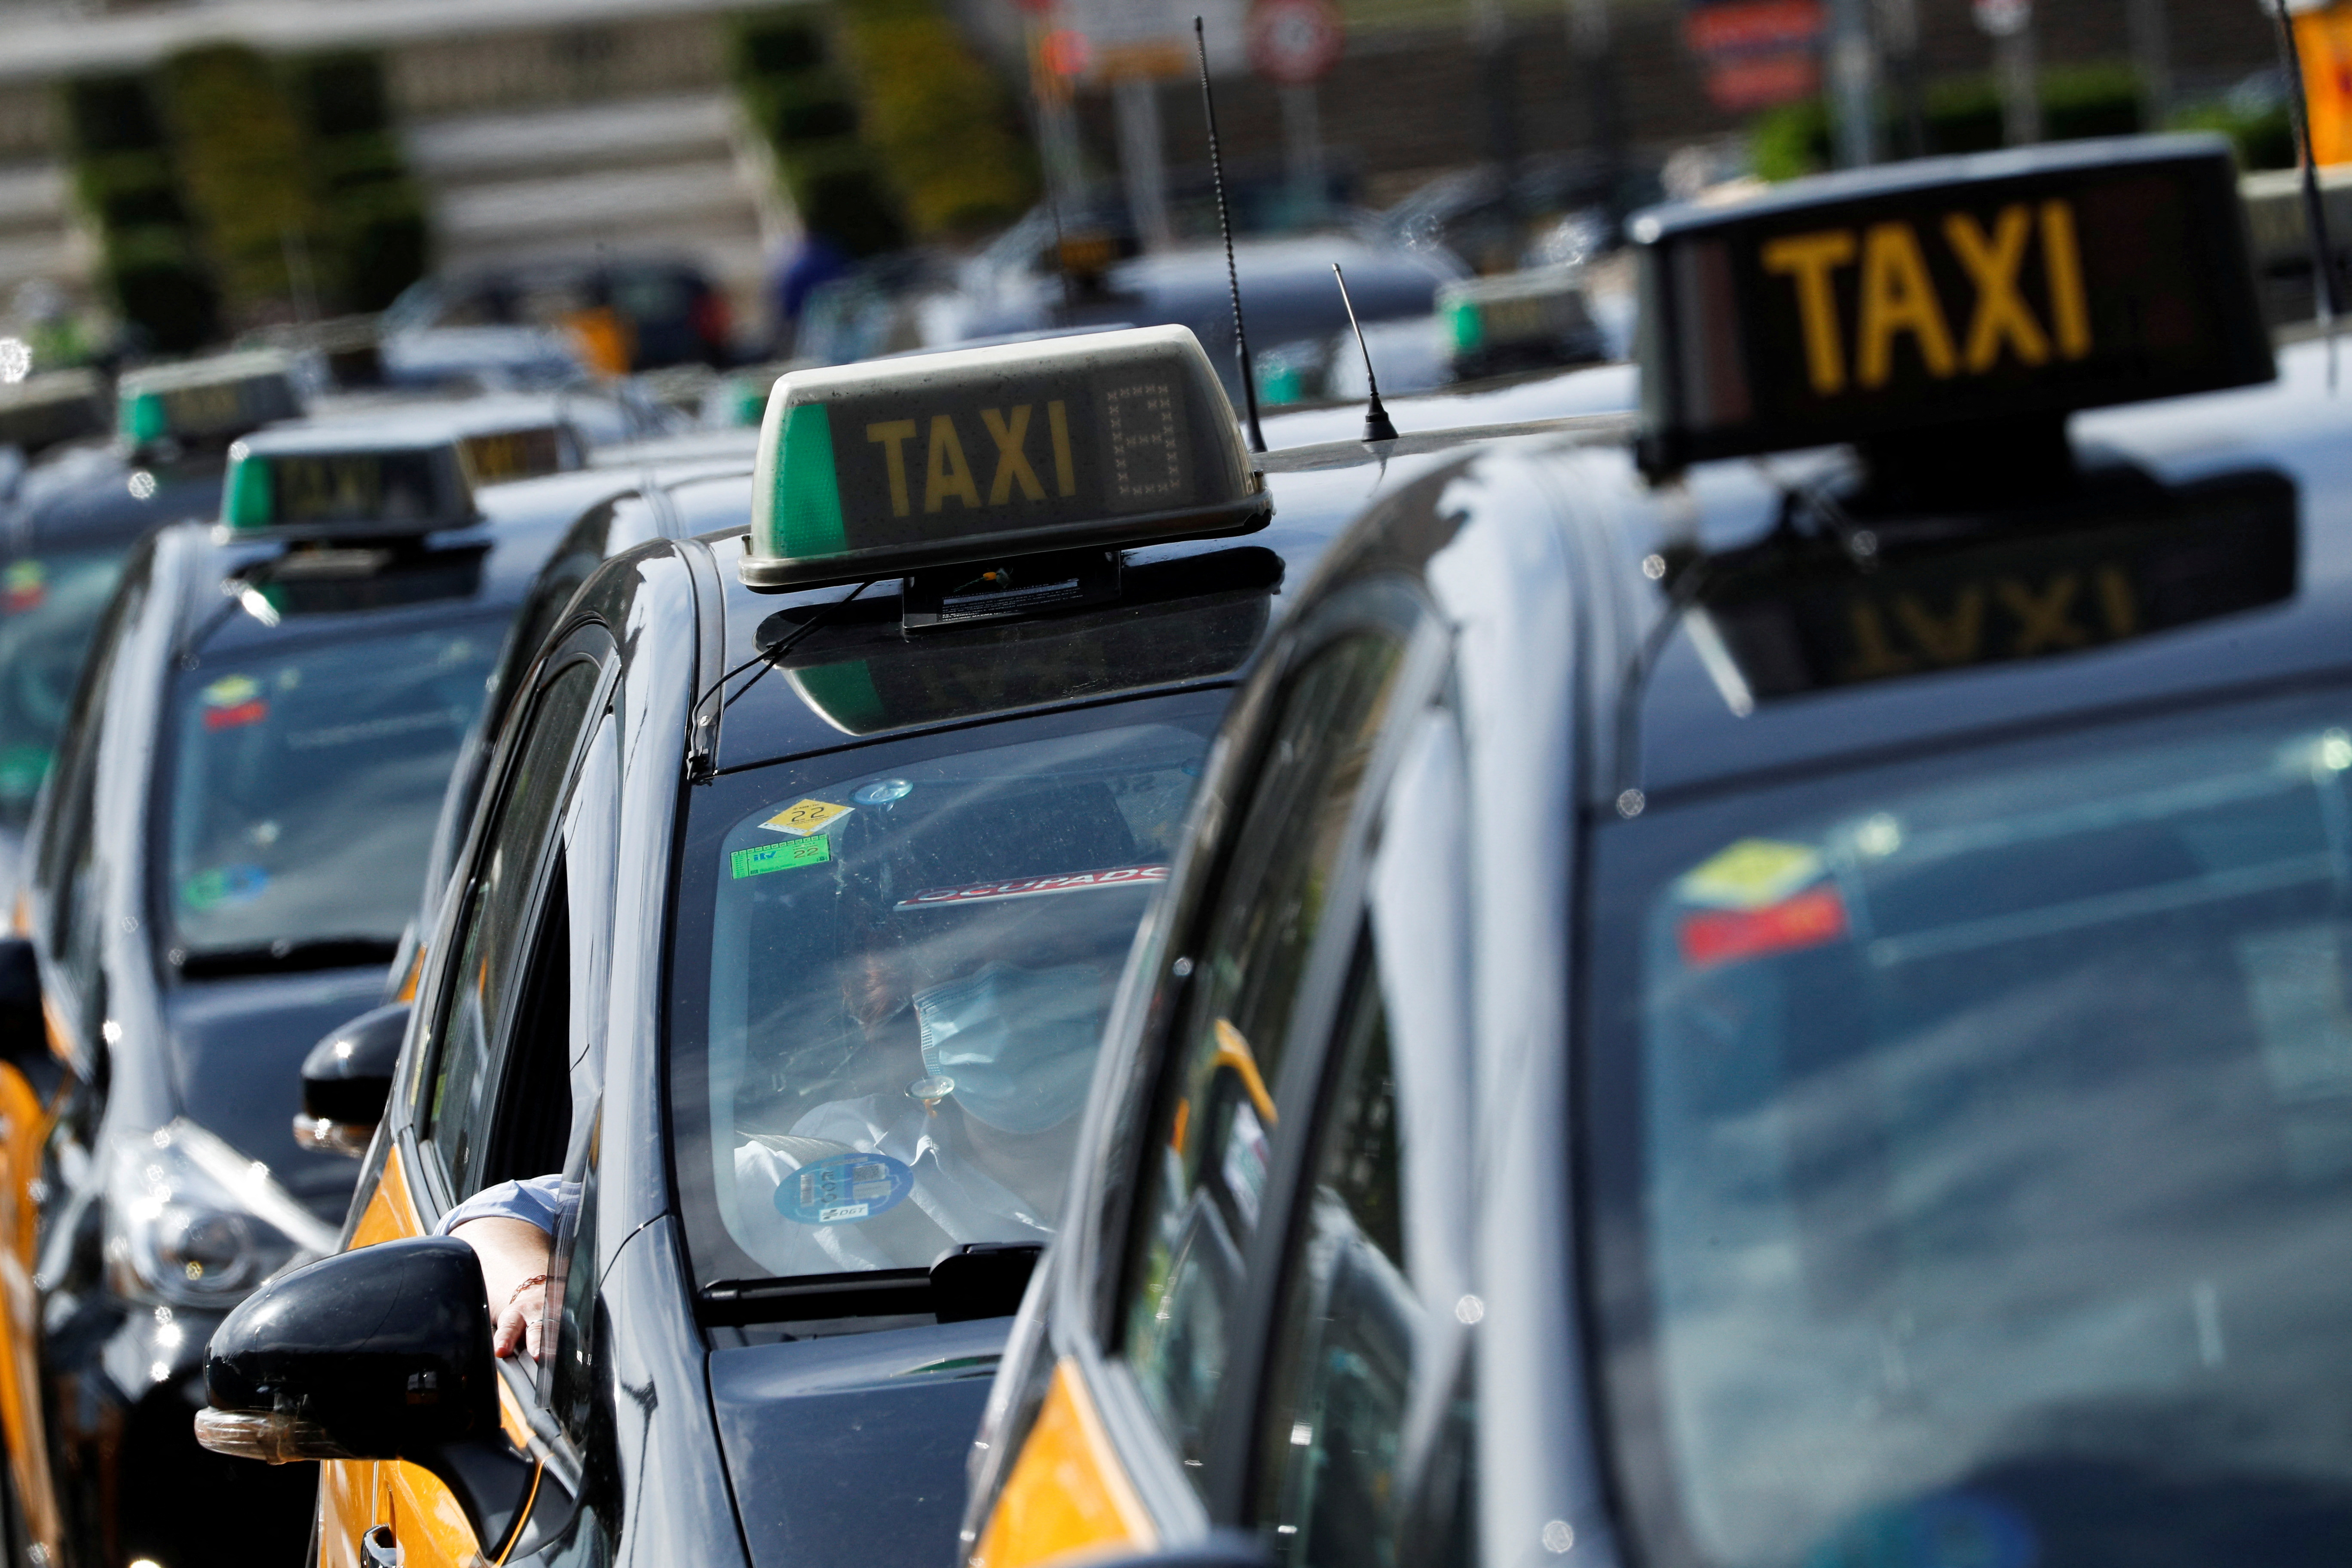 Taxi drivers protest against the regulation of VTC cars in Barcelona